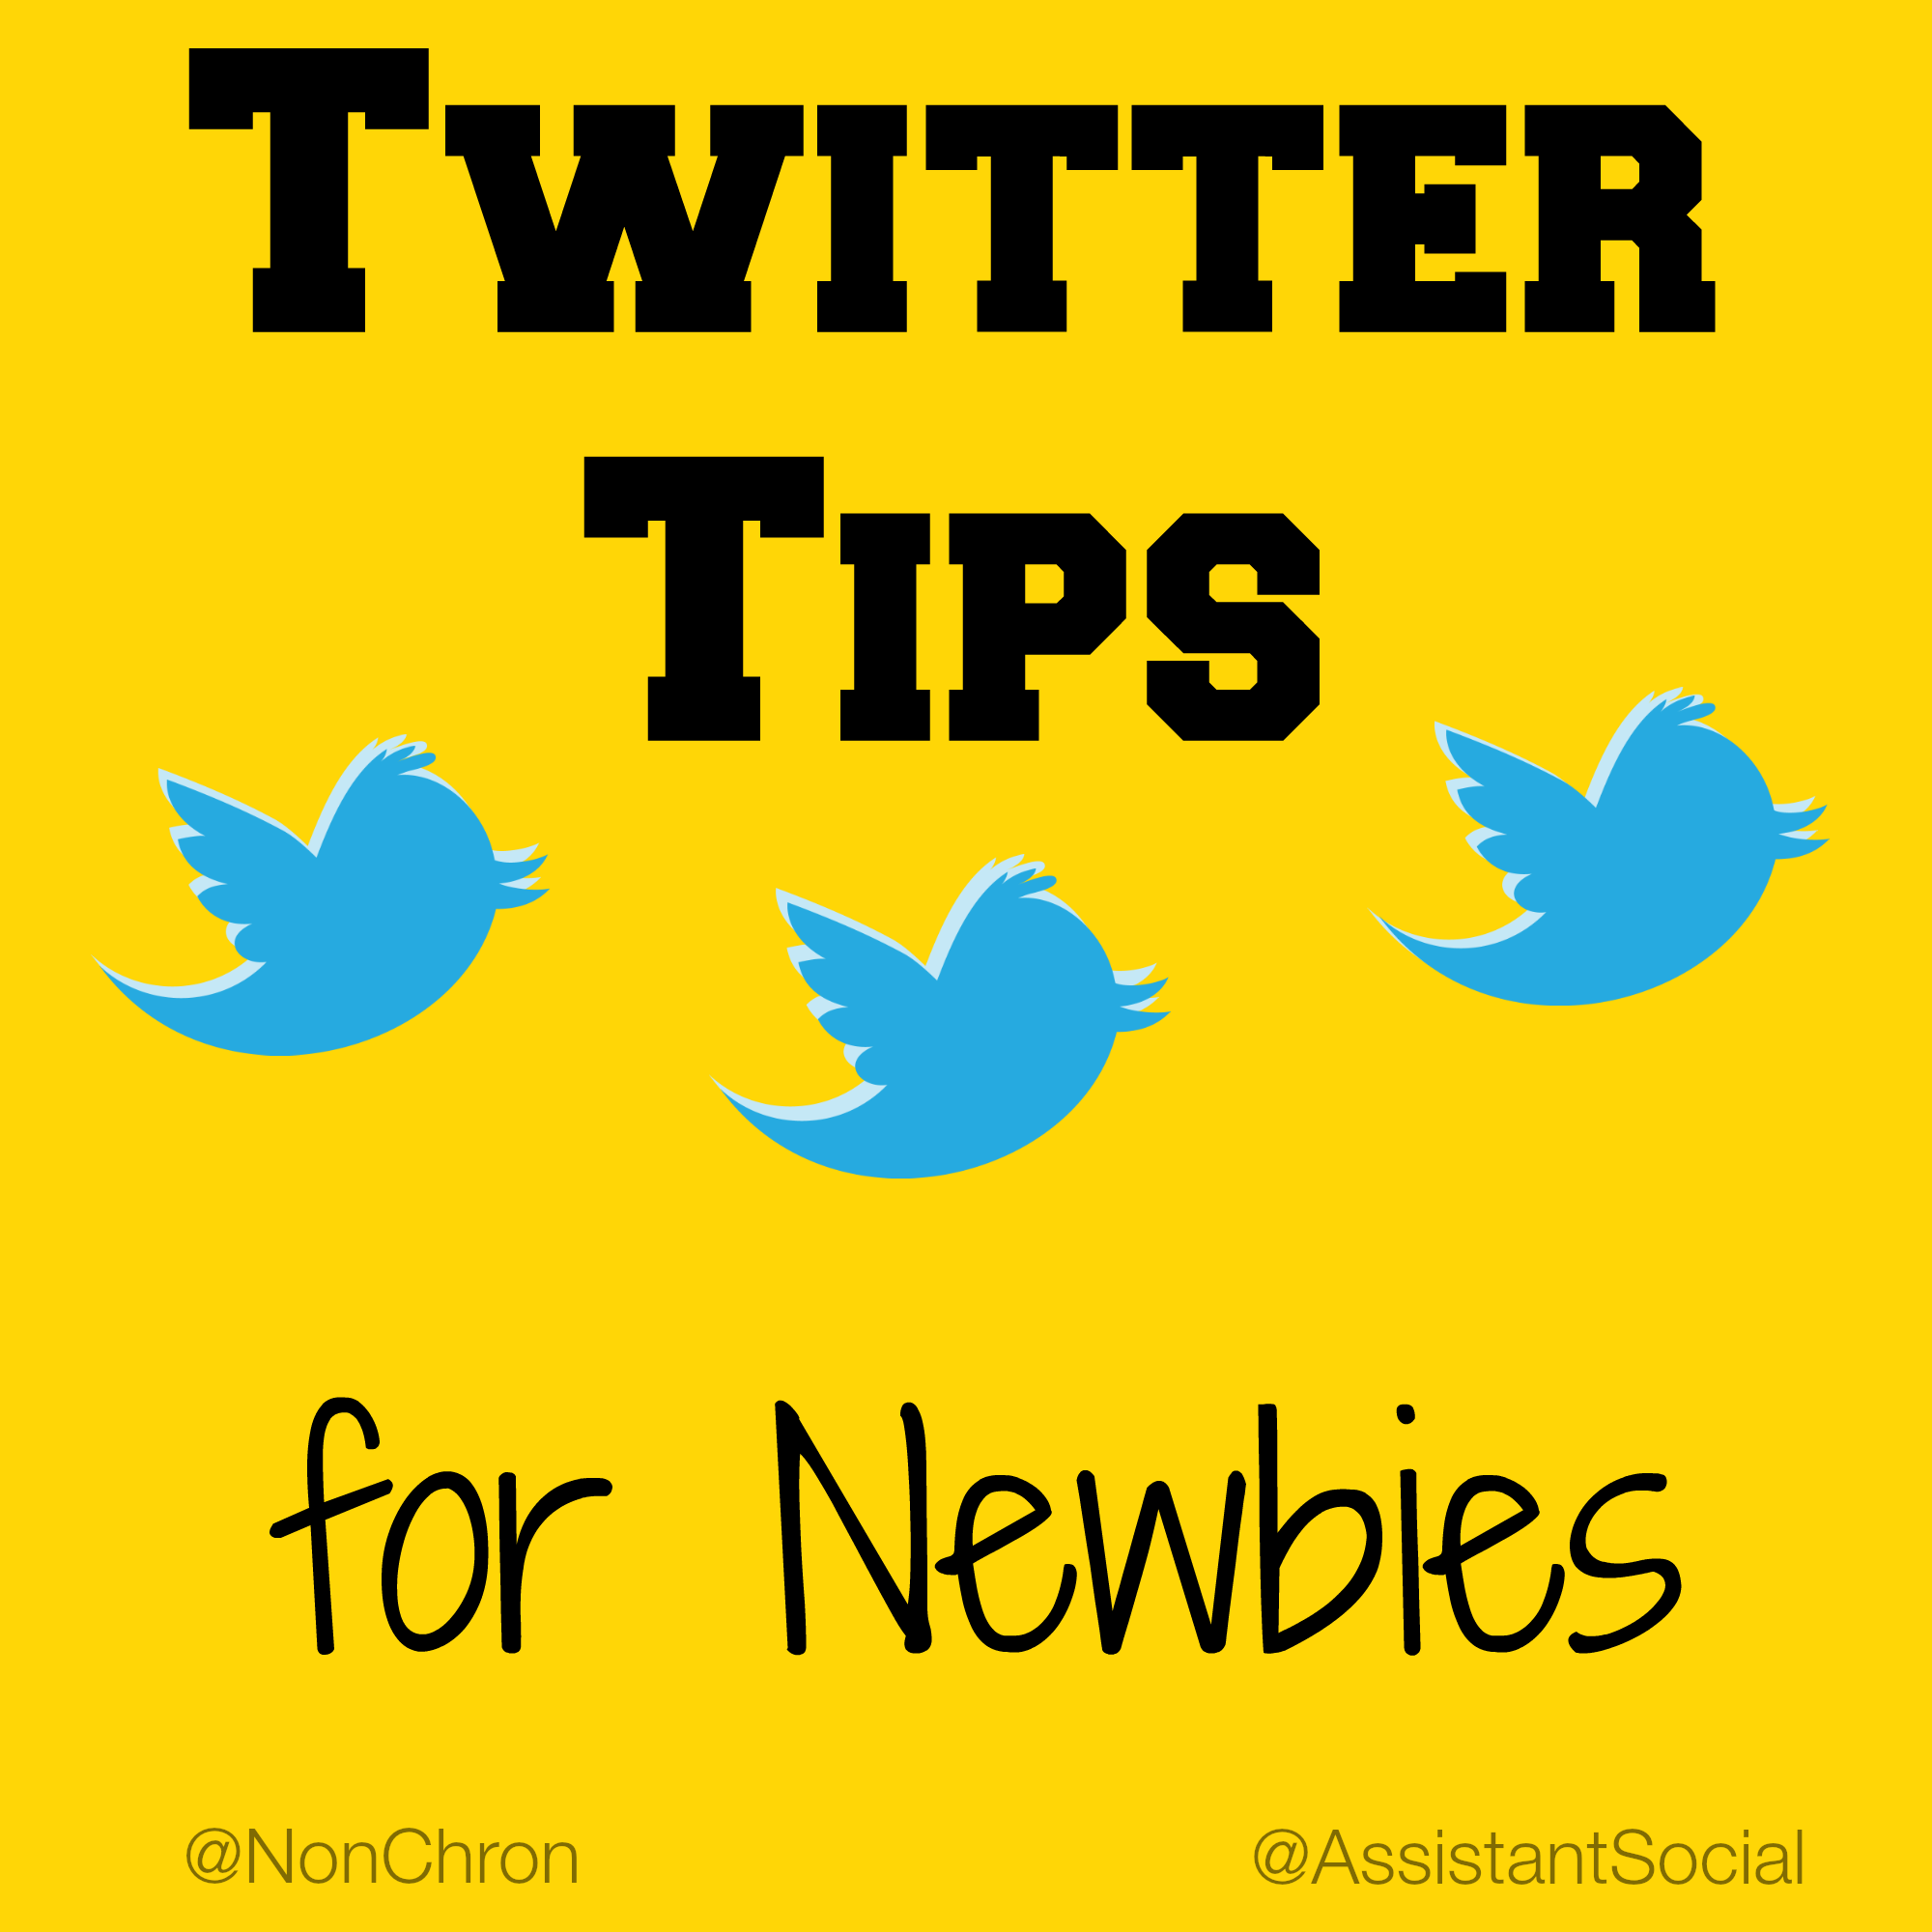 Twitter tips for newbies